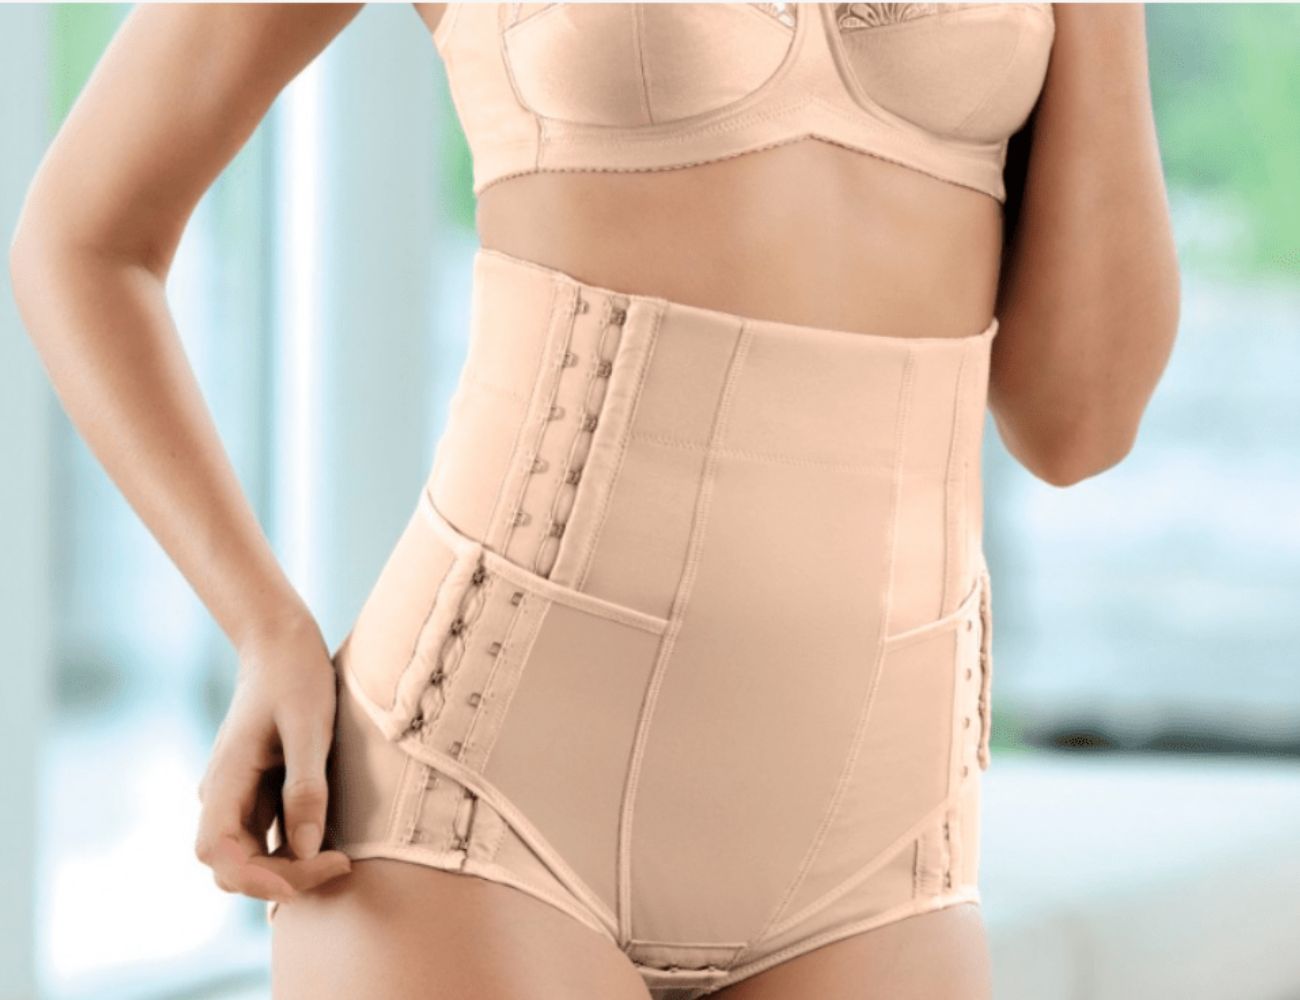 Slimming Girdles - When and how to use - Lojaortopédica